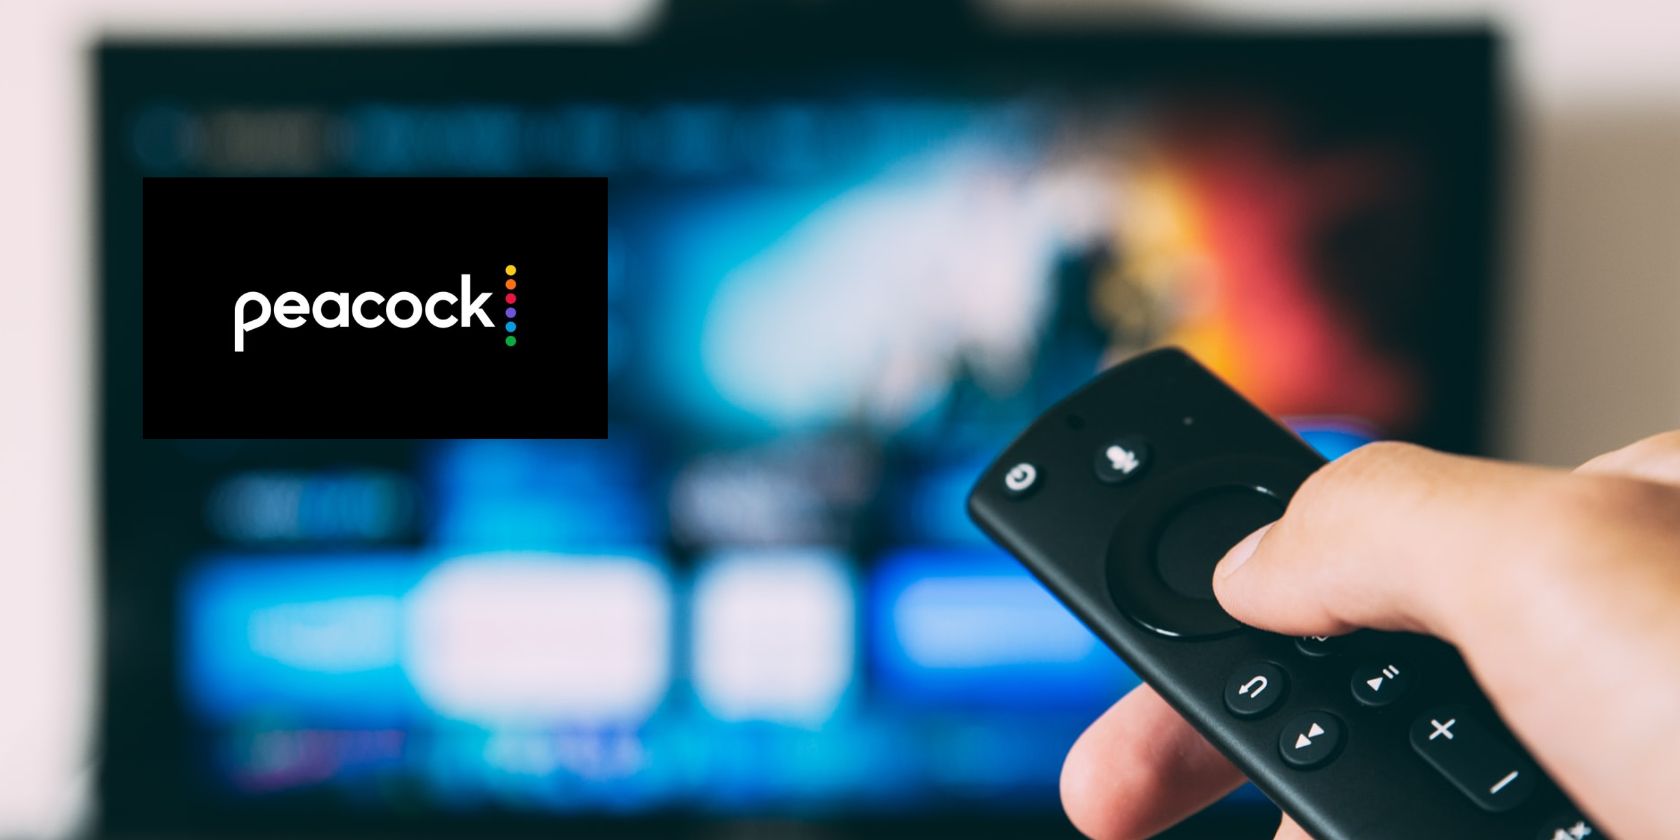 The Peacock app being used on an Amazon Fire TV device.